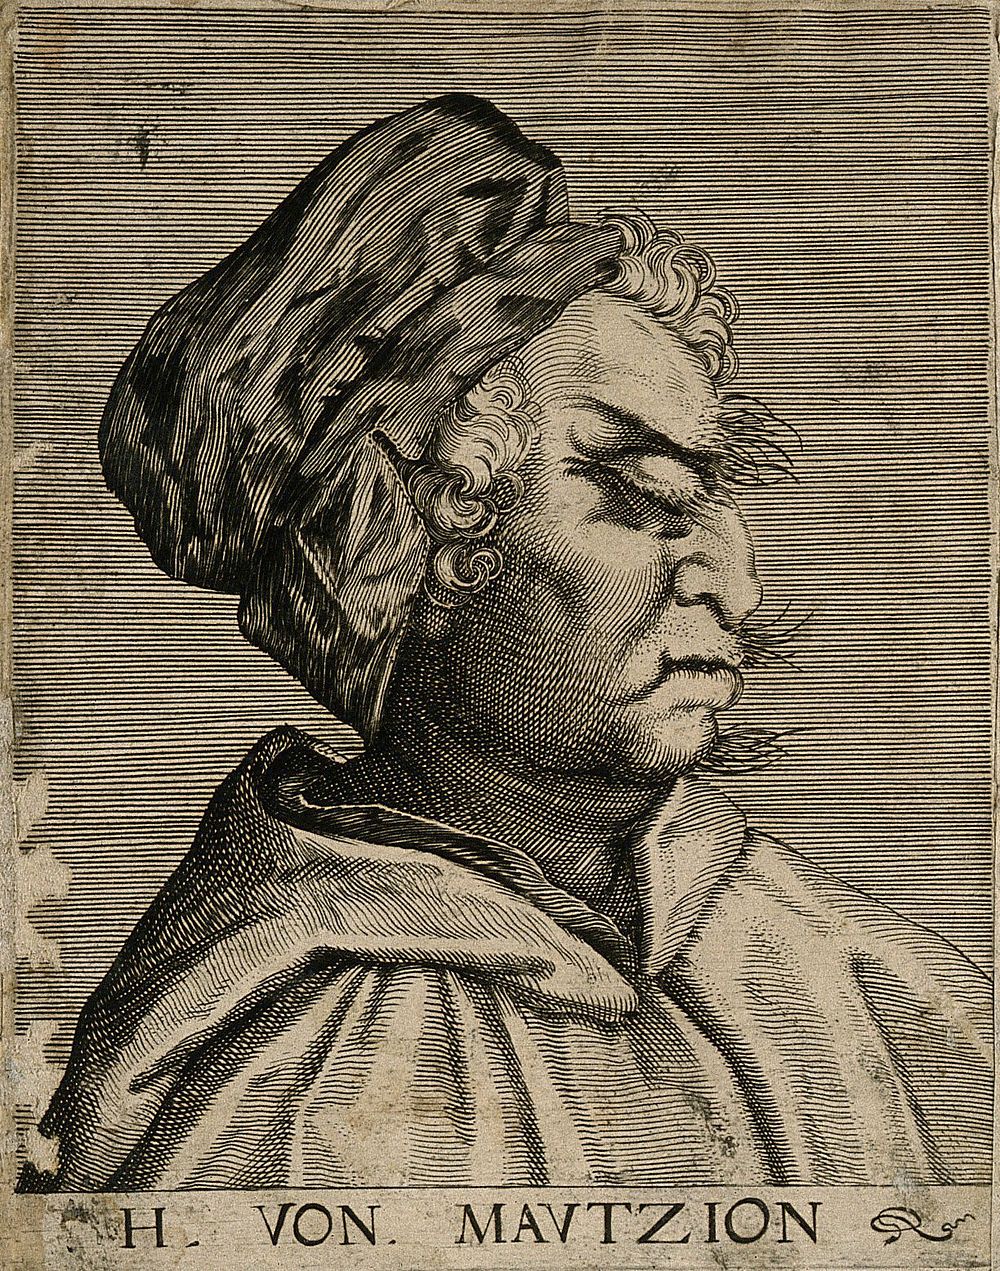 Herr von Mautzion, a character with a grotesque face. Line engraving attributed to D. Custos.